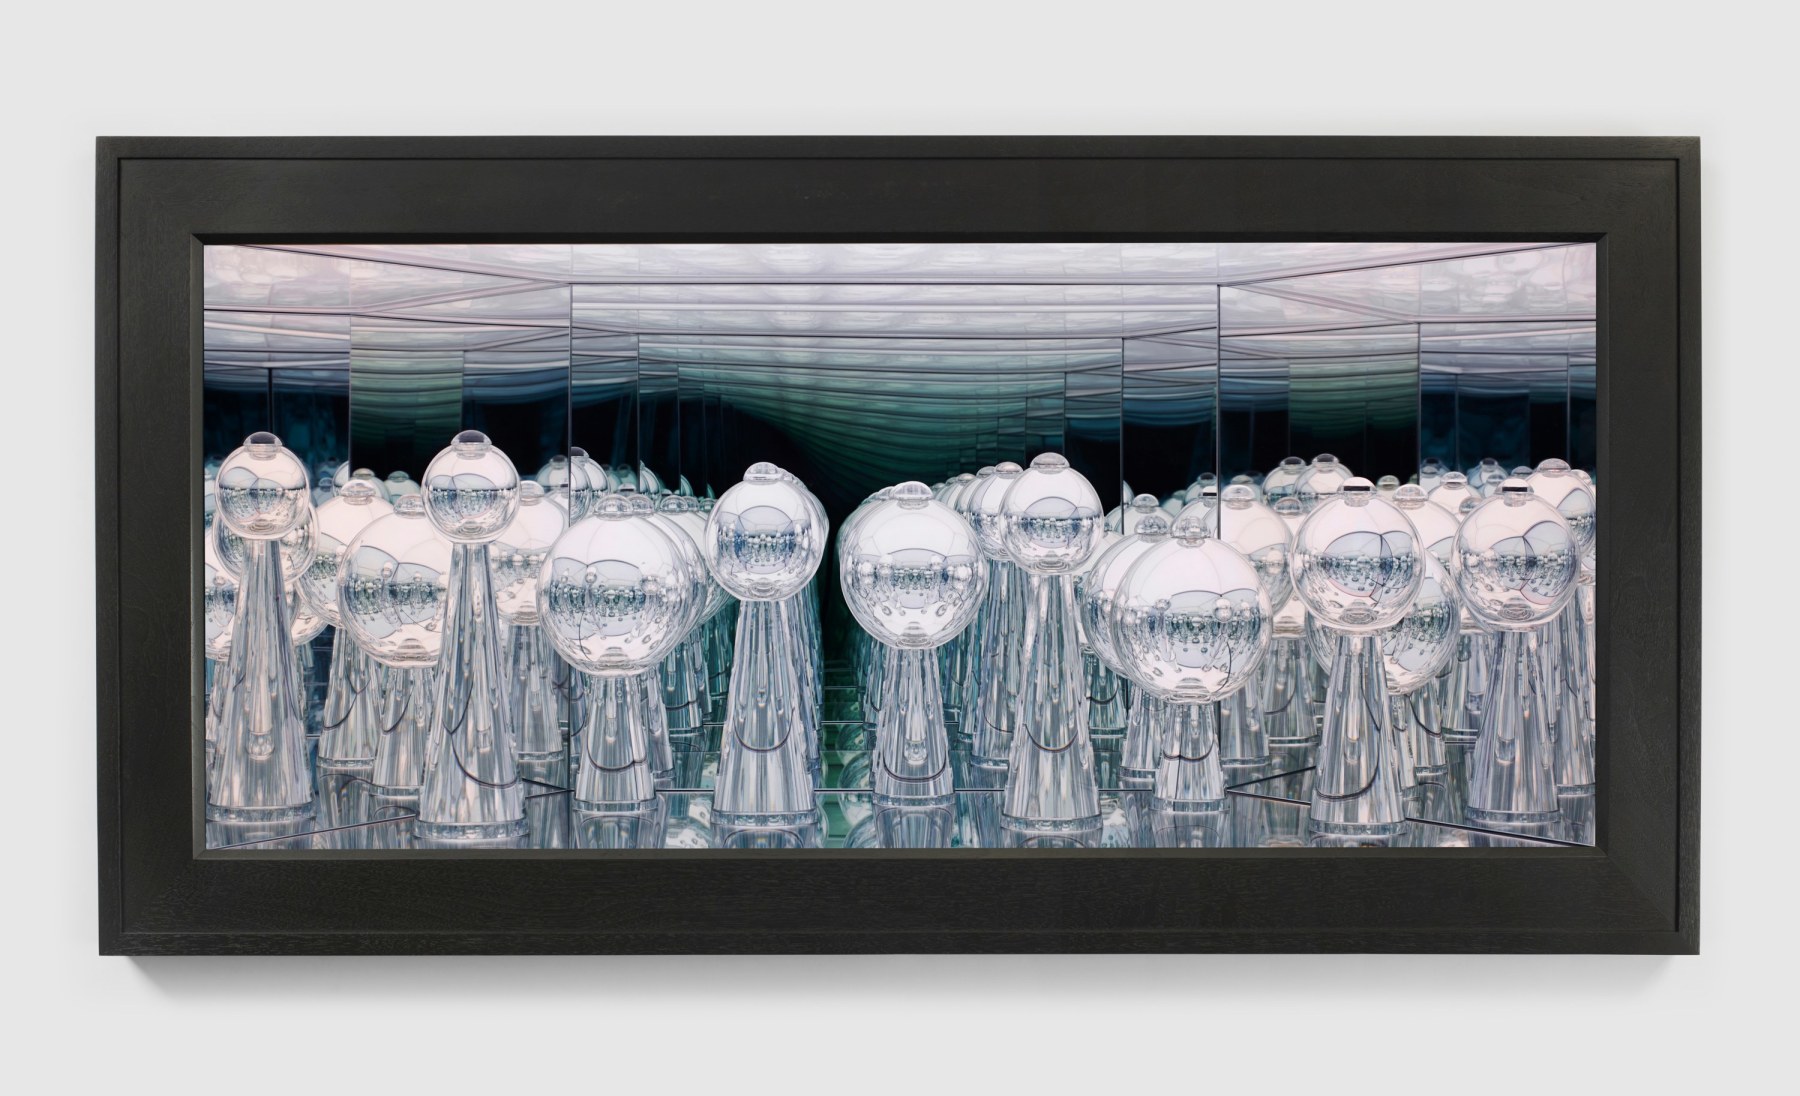 Handblown glass sculptures with reflective surfaces in a lit space framed behind a walnut frame